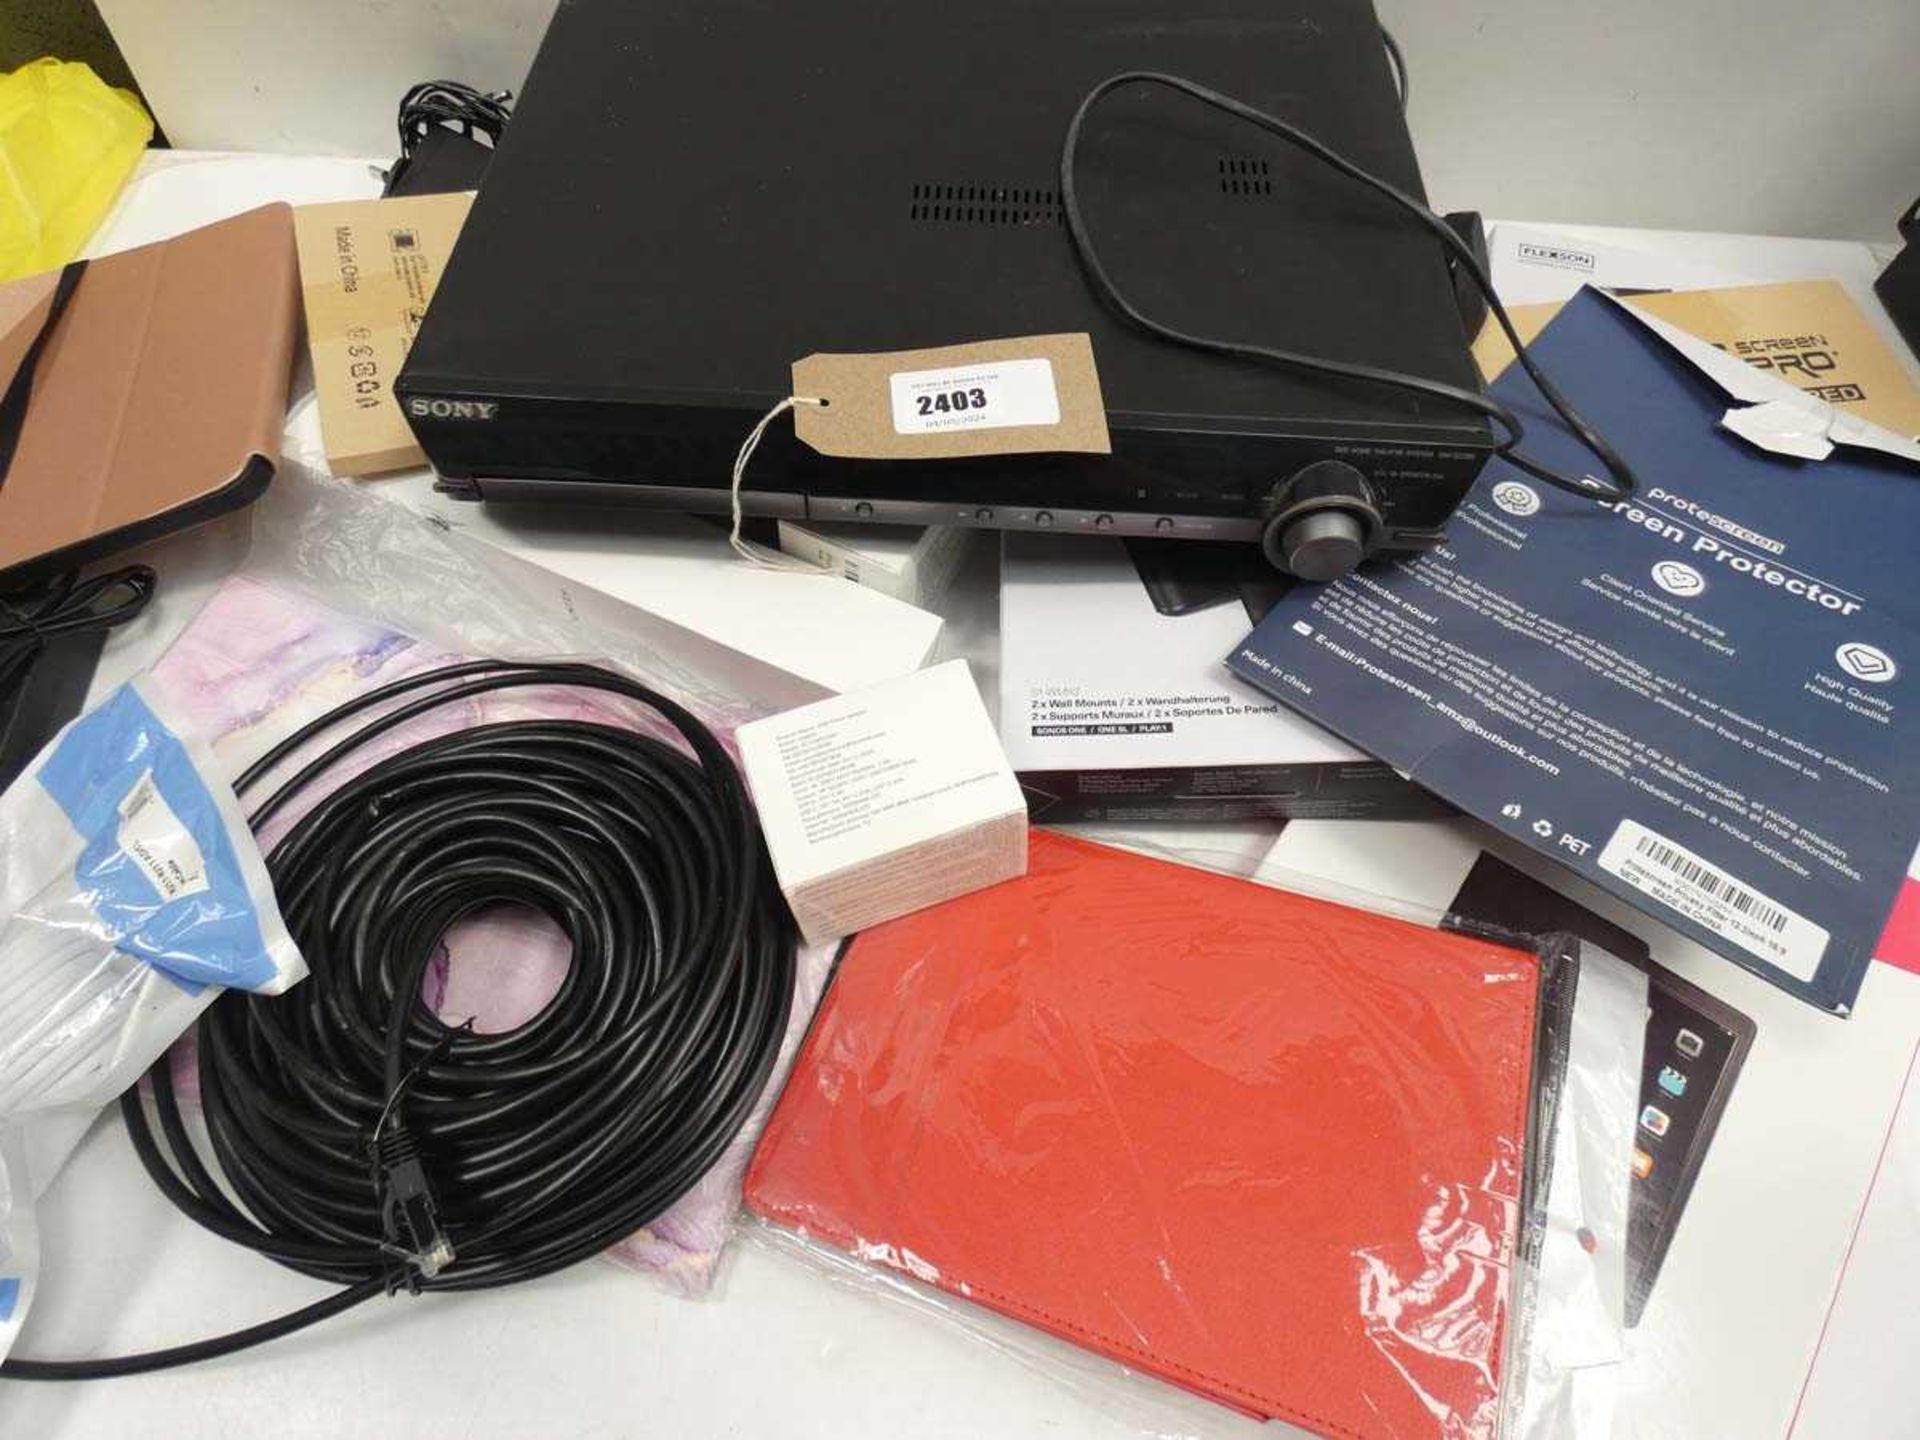 +VAT Bag containing Sony DAV-DZ280 home theater DVD player, tablet cases/covers, cabling, mounts,